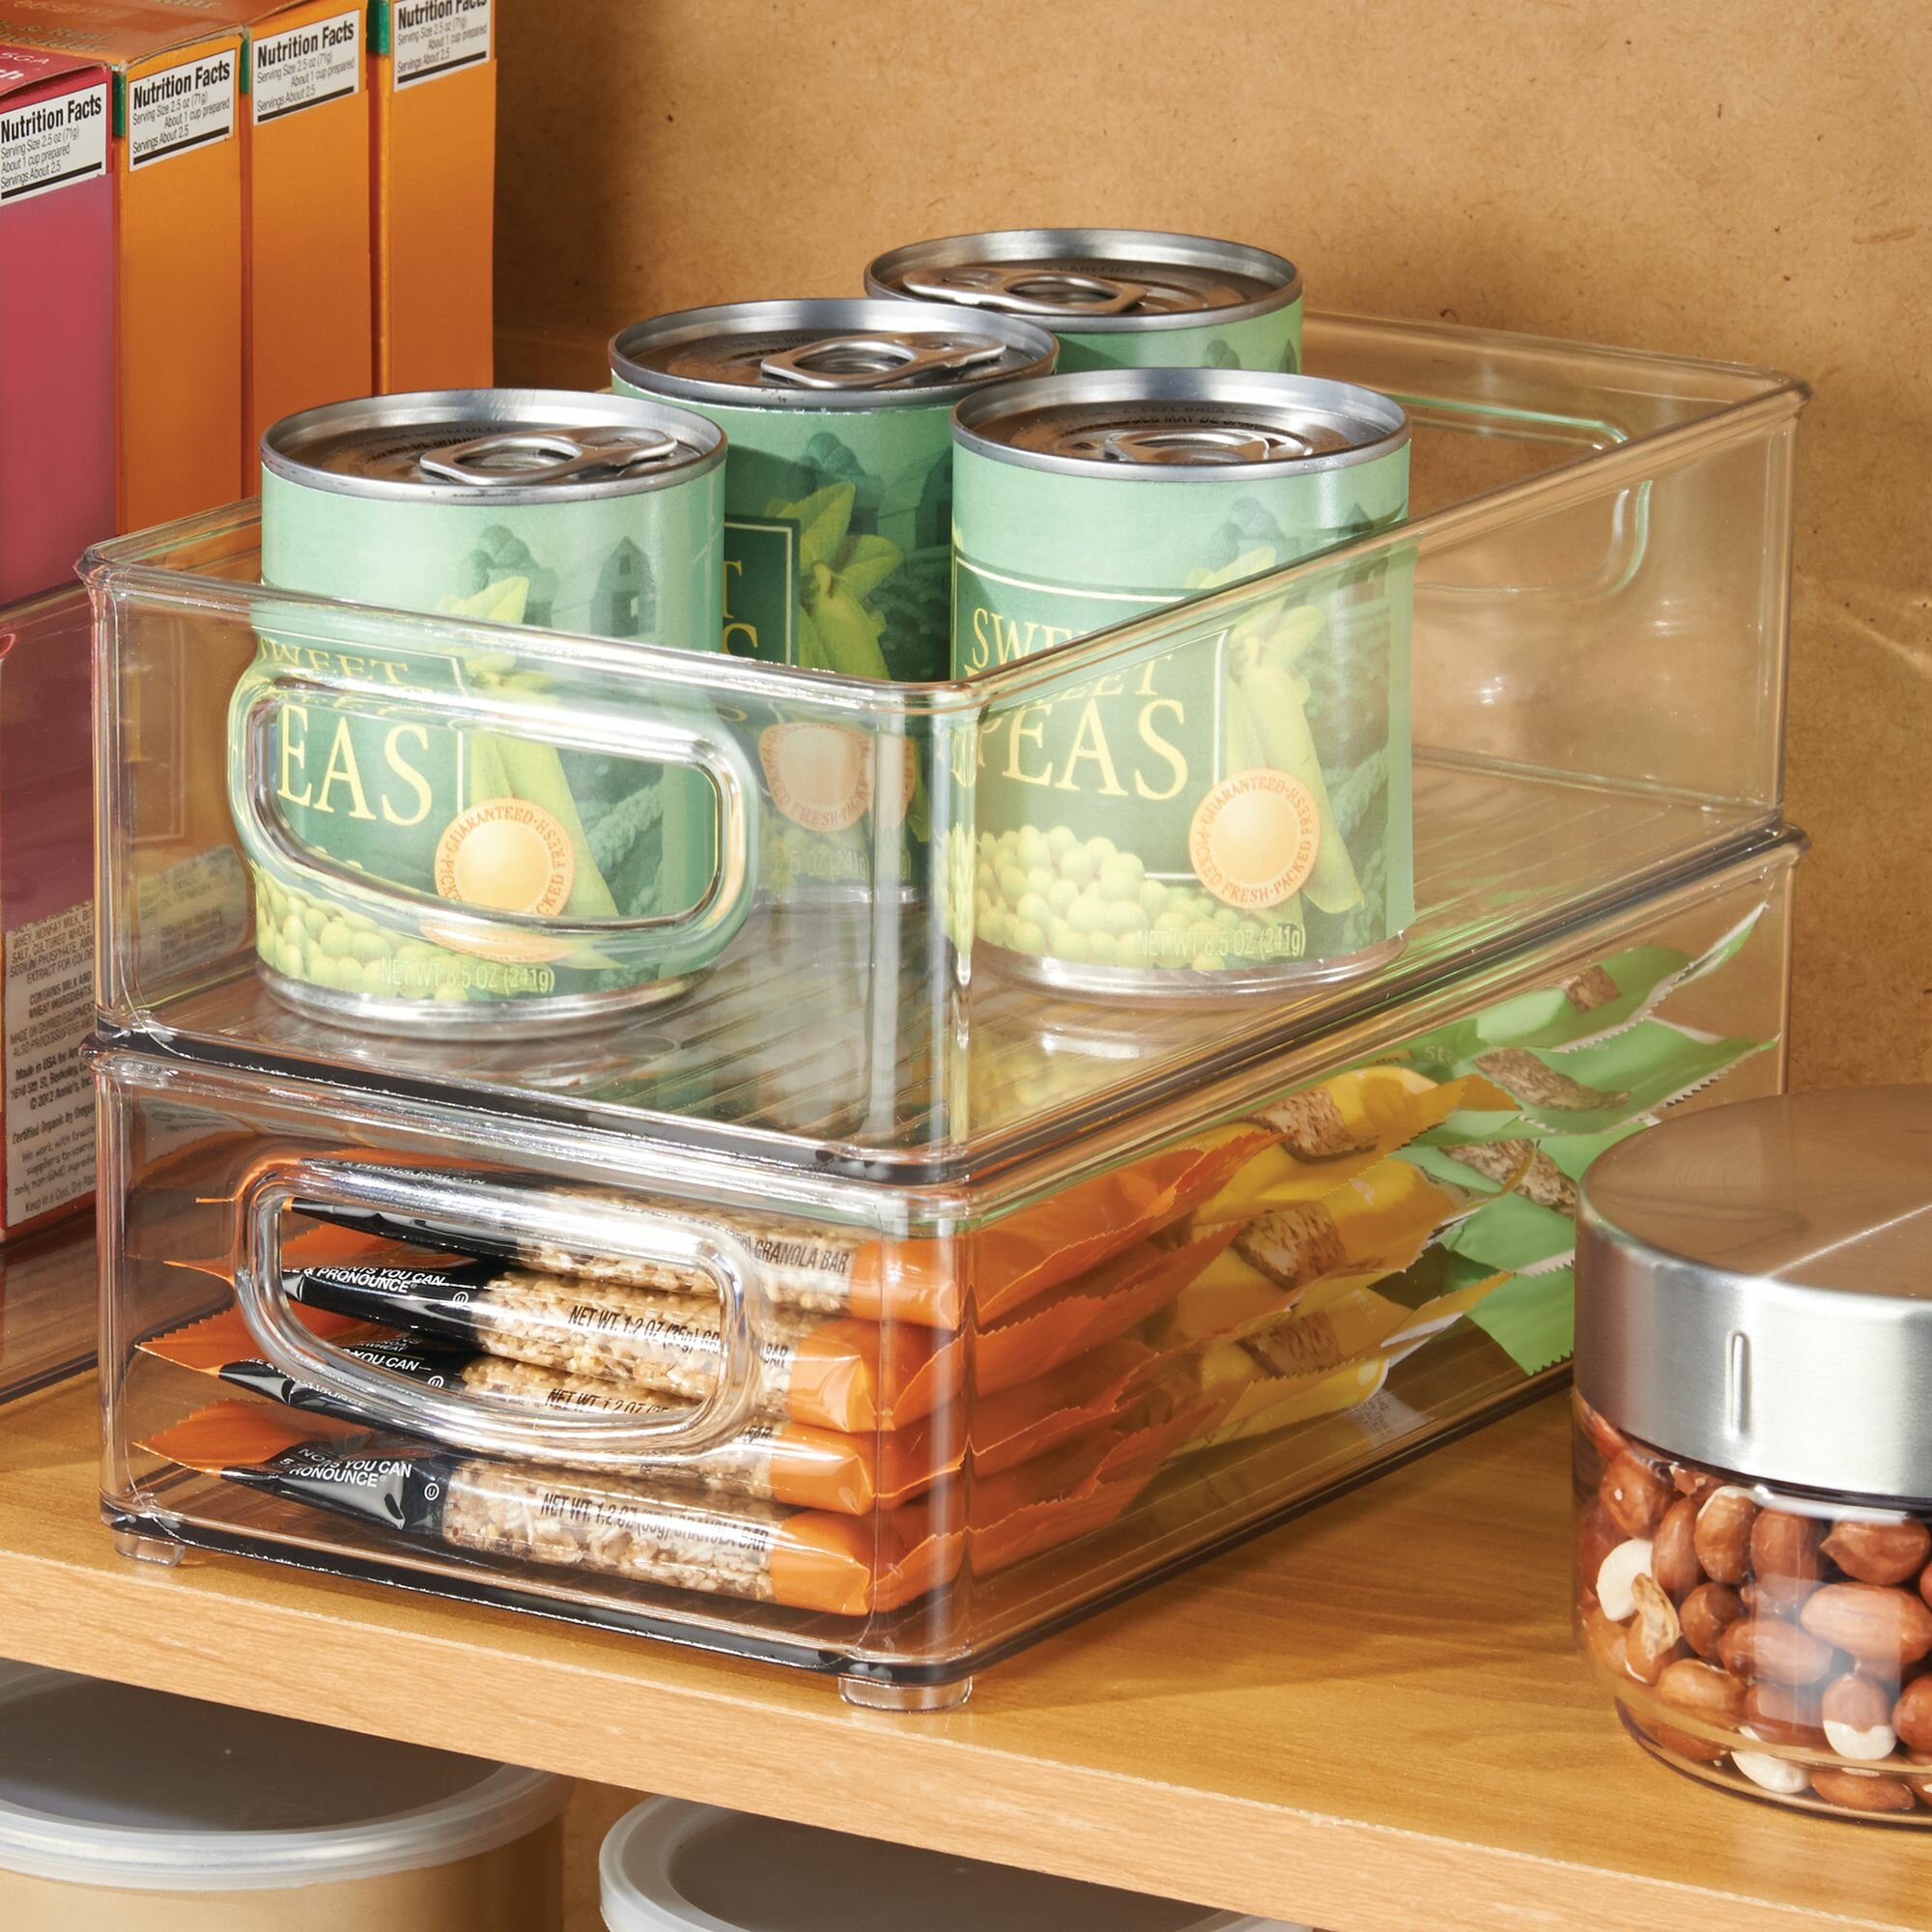 5 x Clear Kitchen Storage Canisters